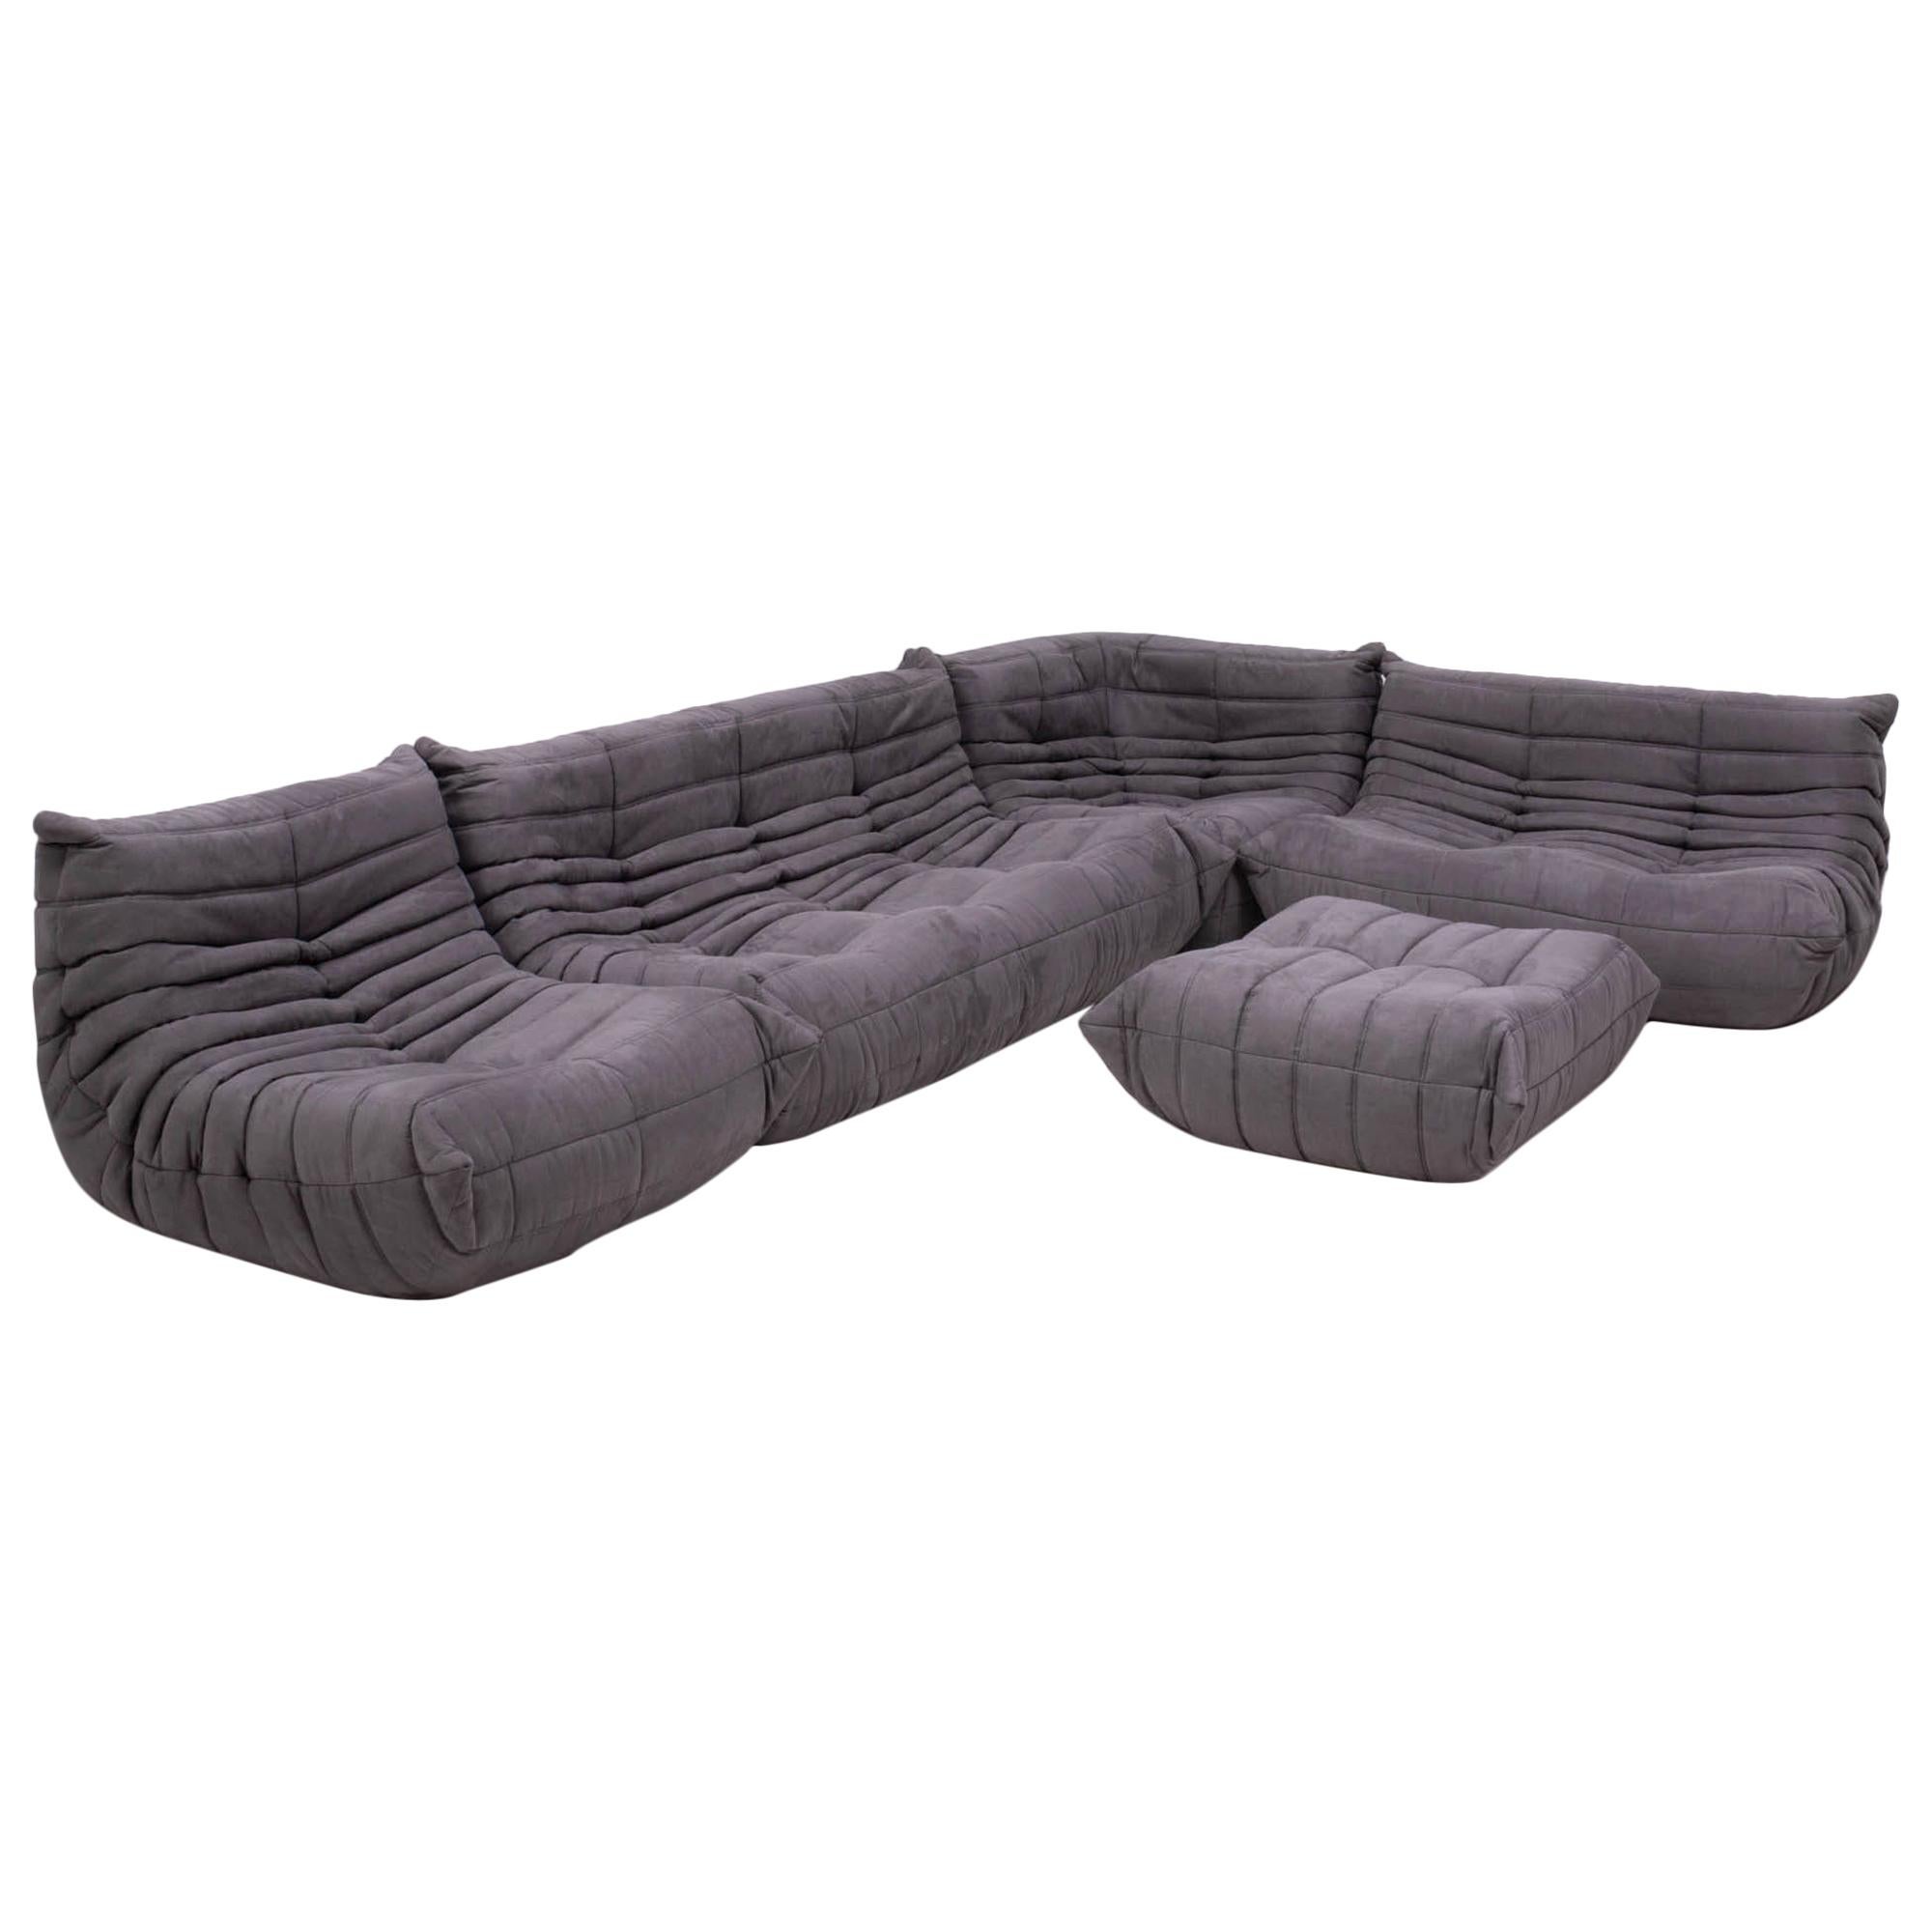 Togo Grey Modular Sofa and Footstool by Michel Ducaroy for Ligne Roset, Set of 5